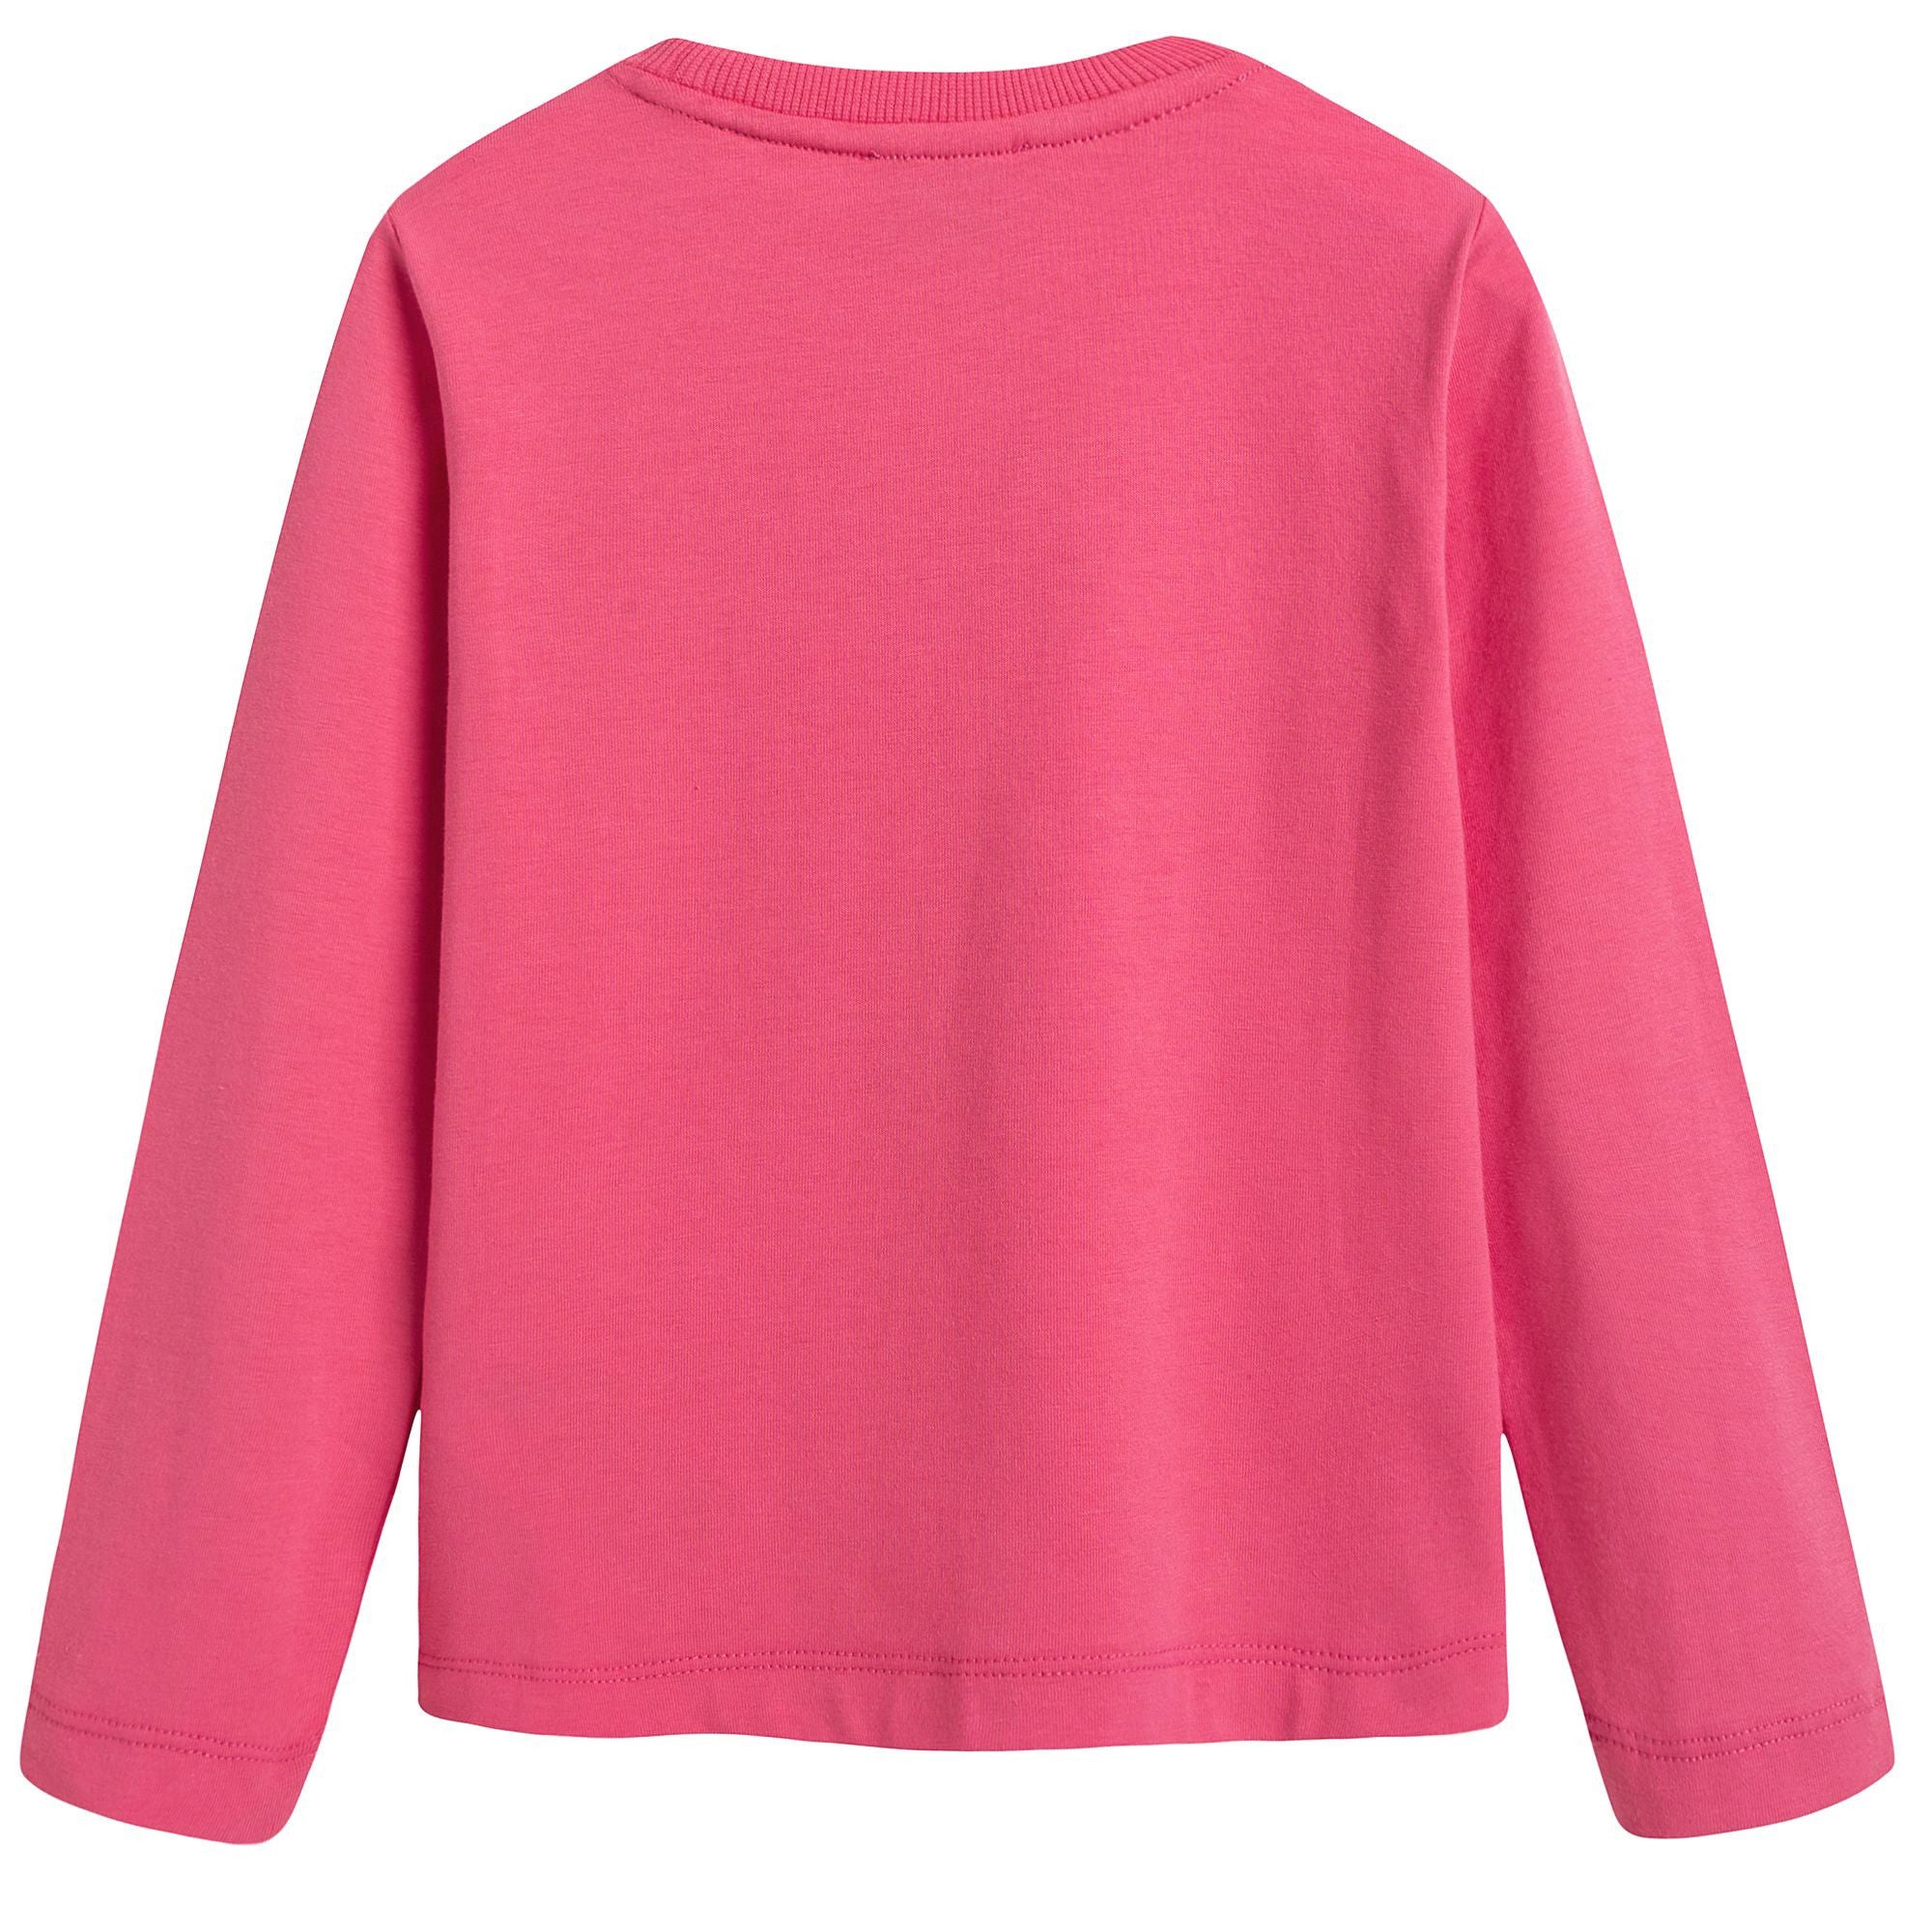 Girls Coral Pink Teddy Top